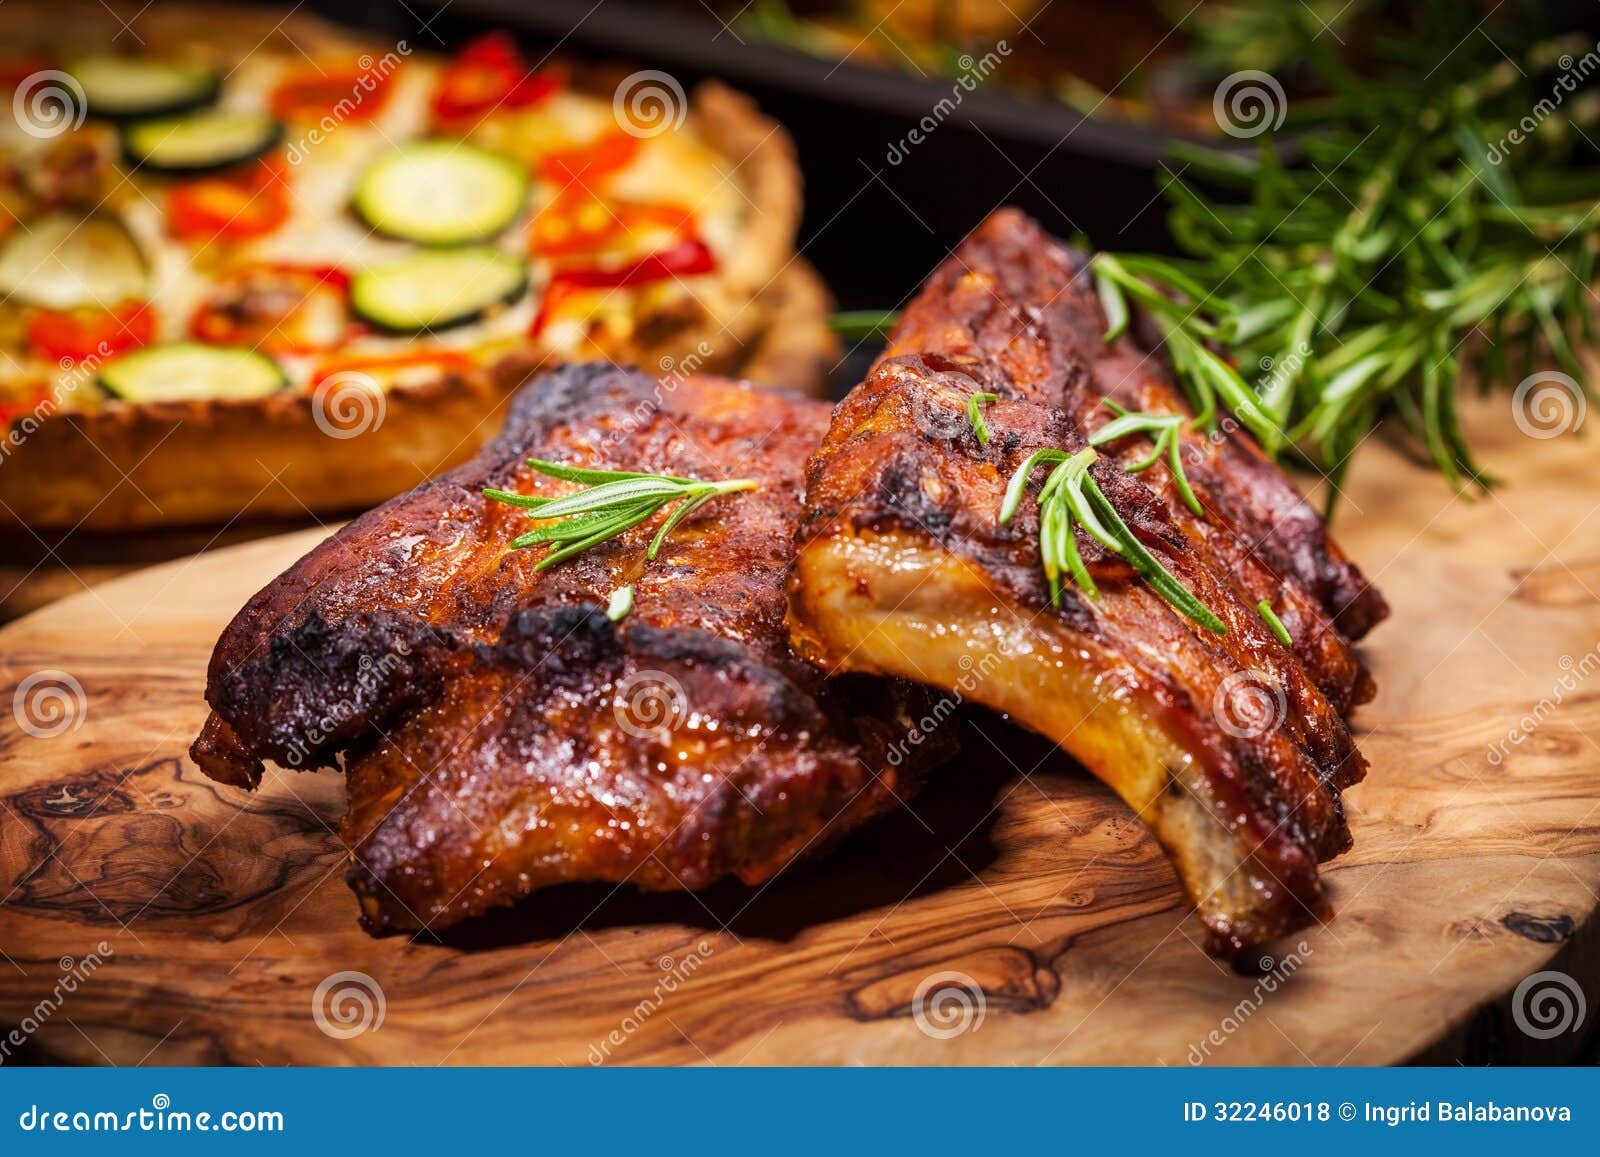 bbq spare ribs with herbs